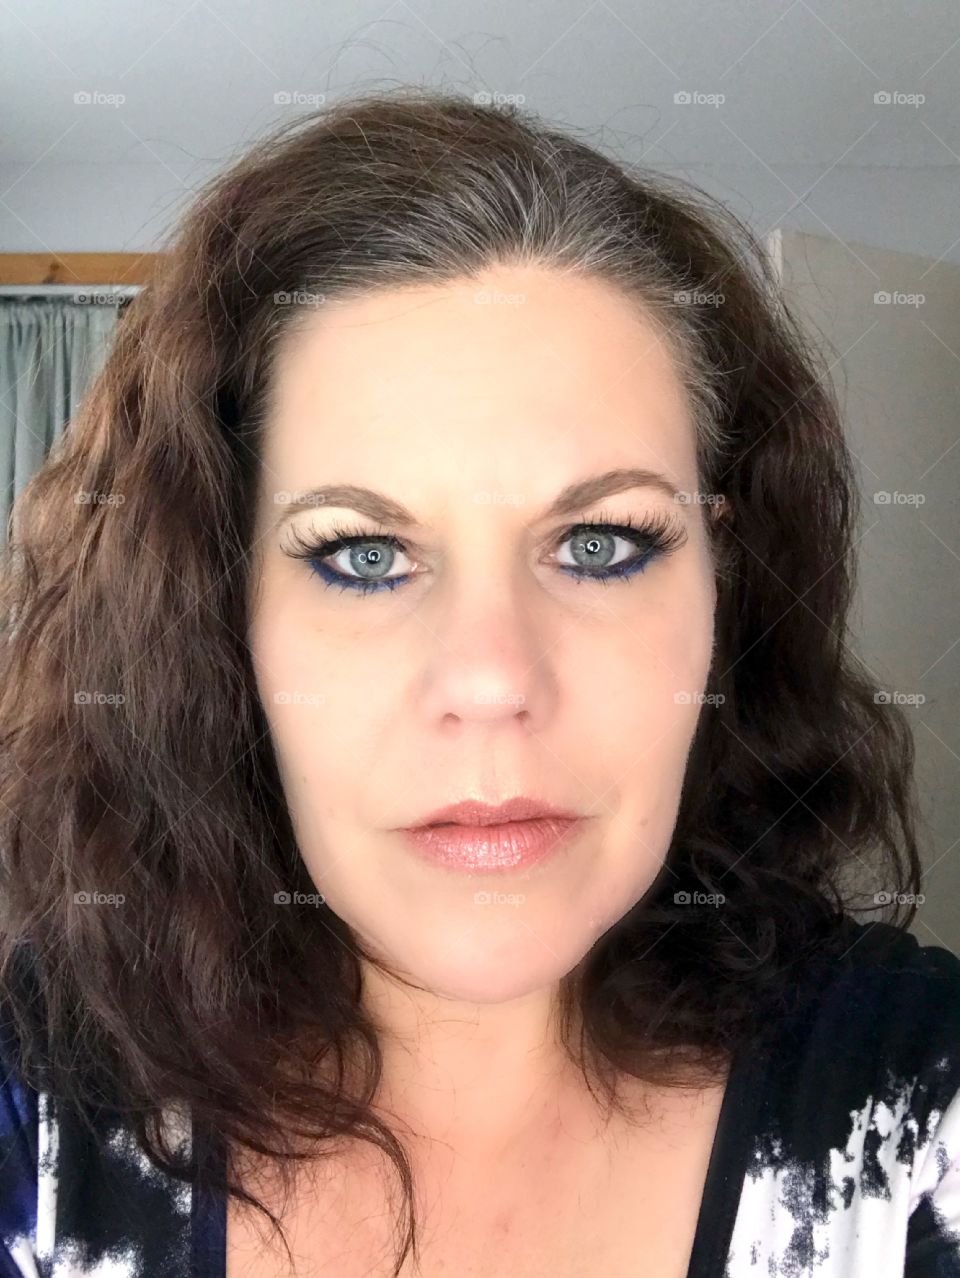 Trying out a new look today, a nude lip in the color First Love LipSense and a bolder eye with Ocean EyeSense.